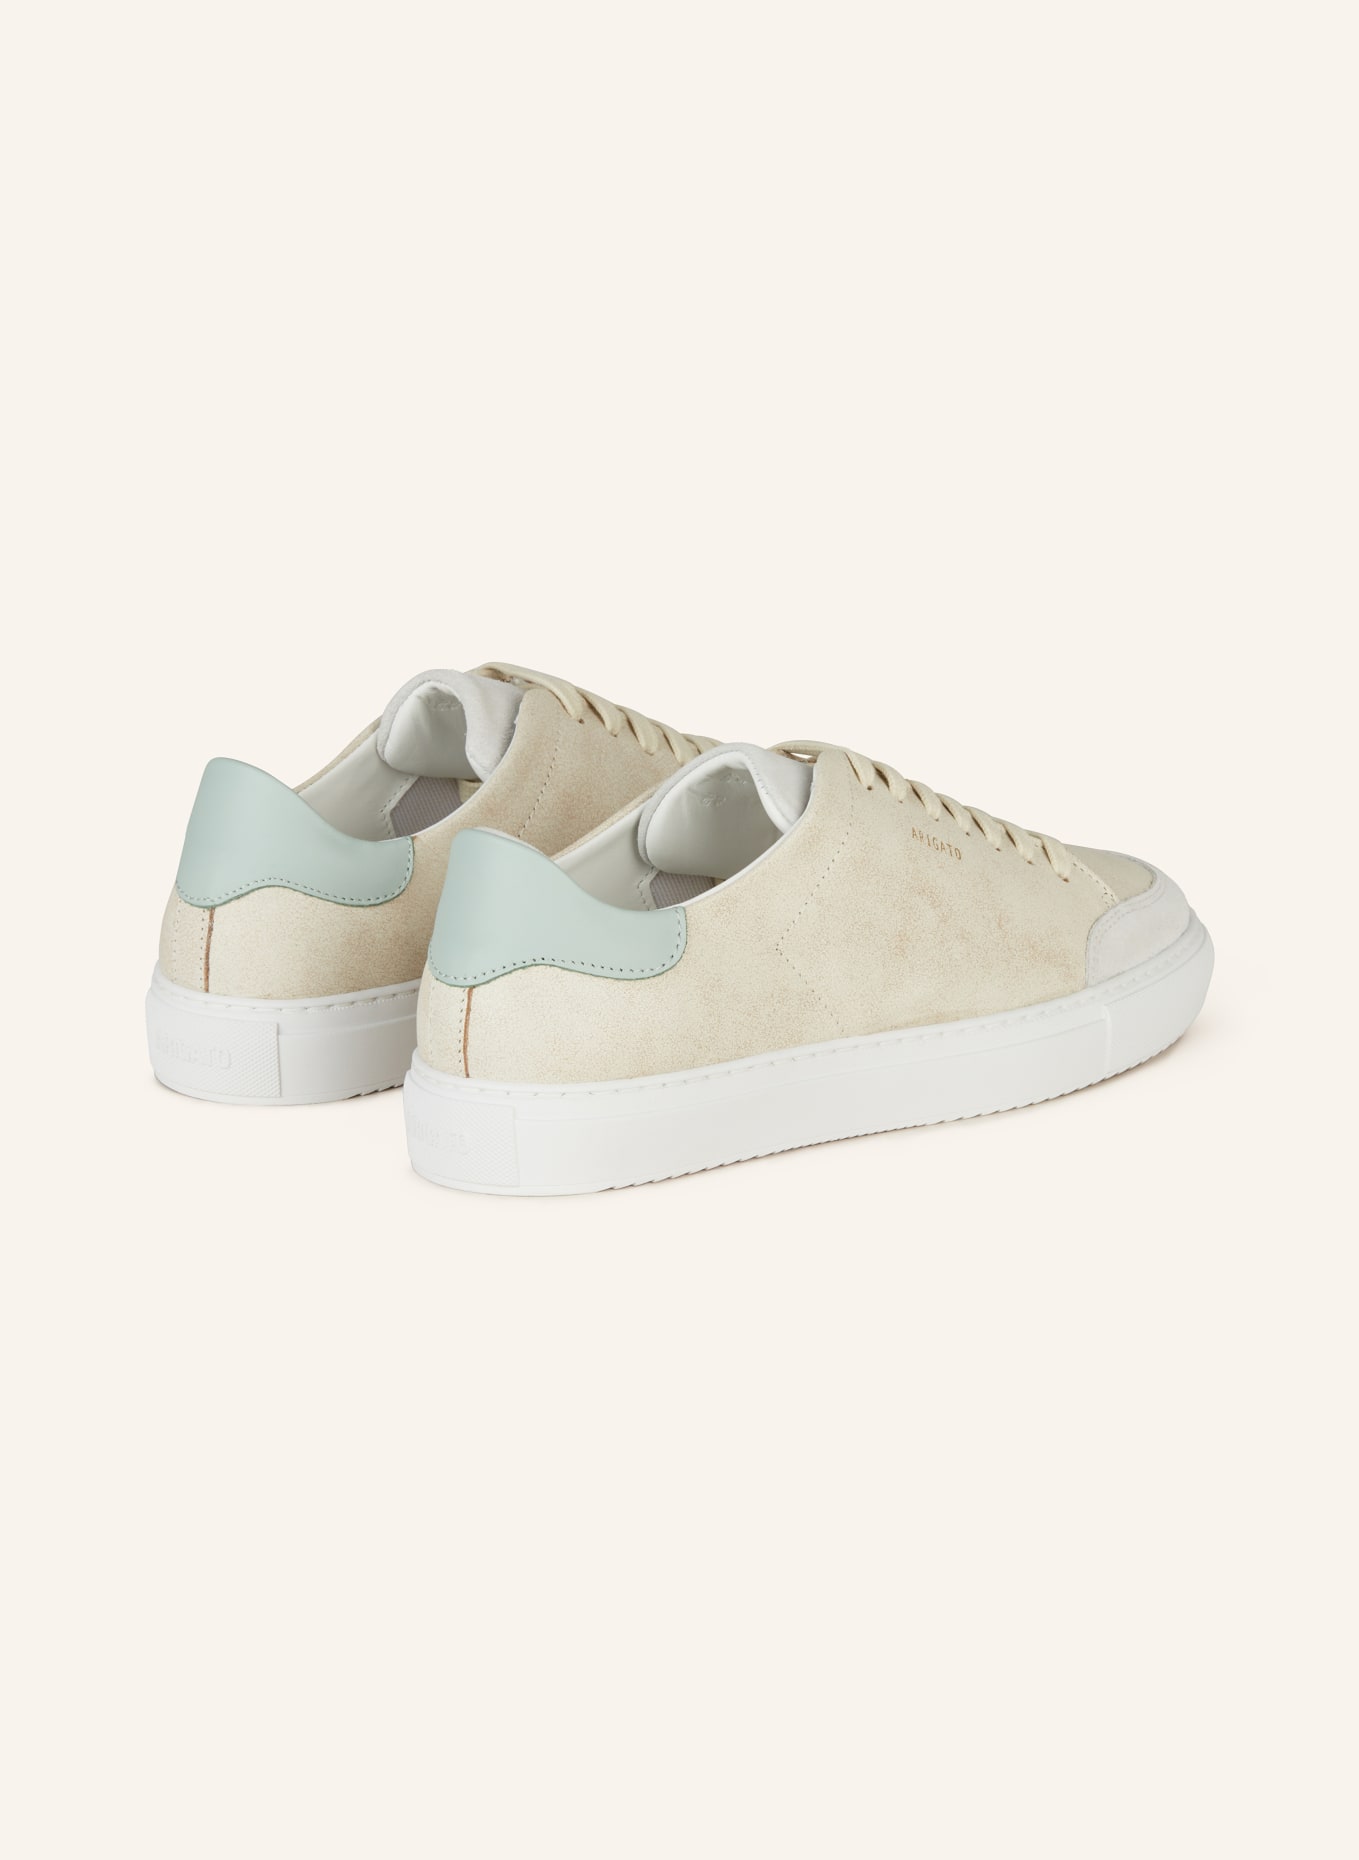 AXEL ARIGATO Sneakers CLEAN, Color: BEIGE/ LIGHT GRAY (Image 2)